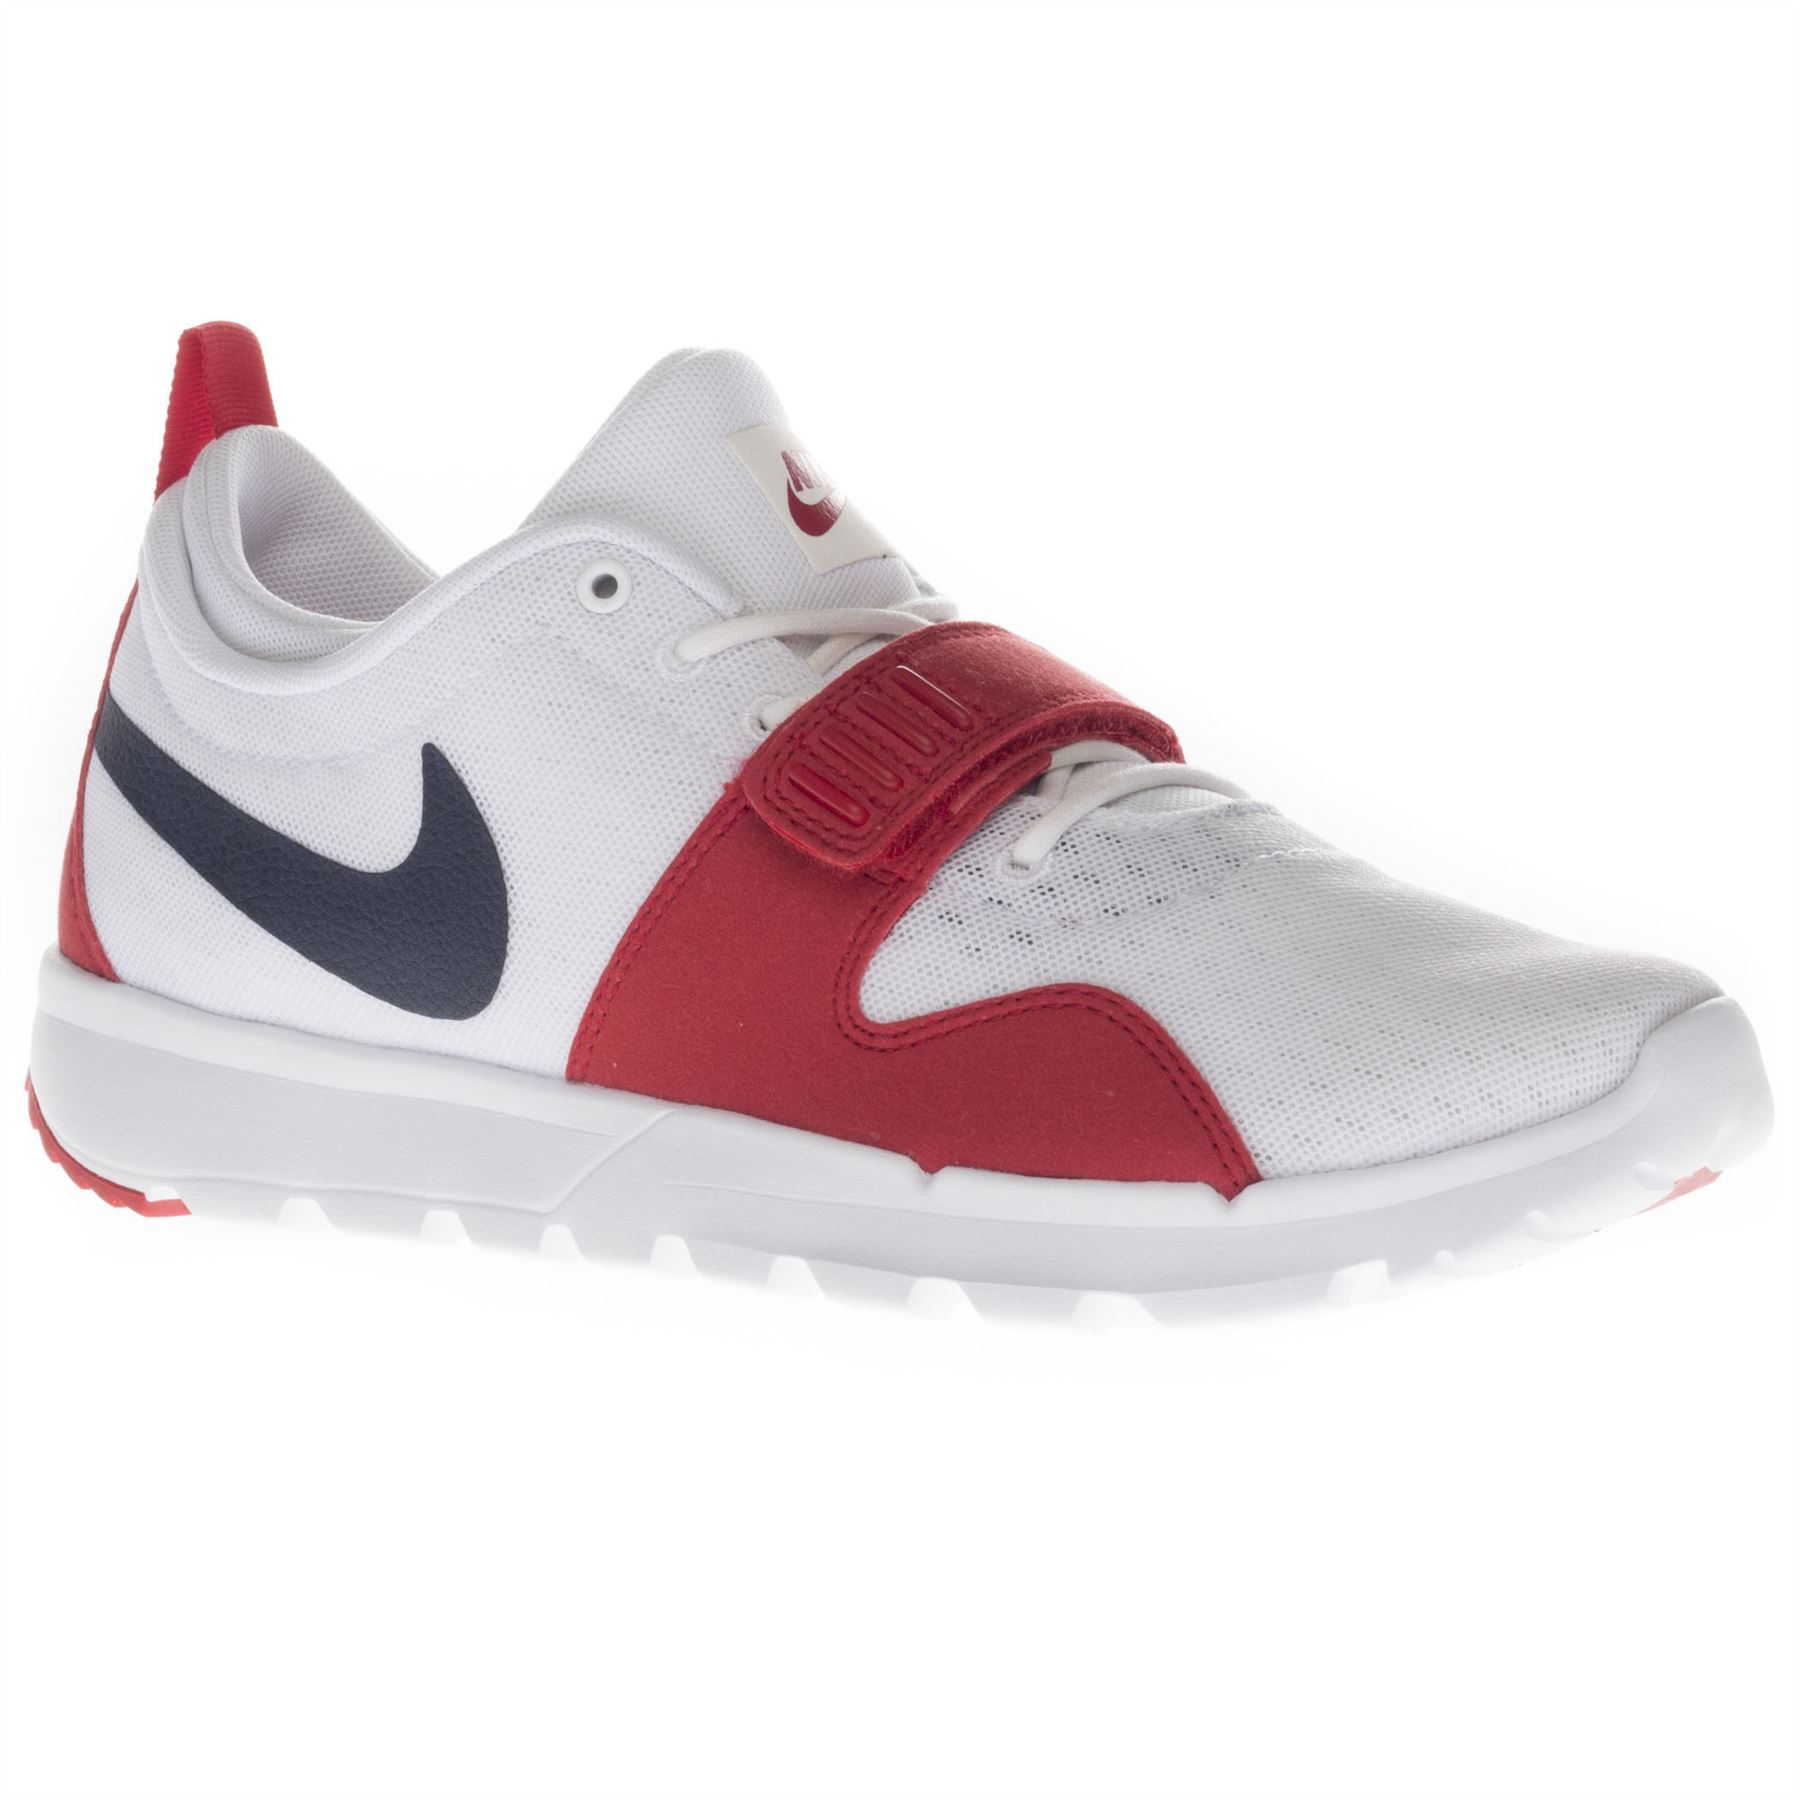 nike running shoes with velcro strap f68384